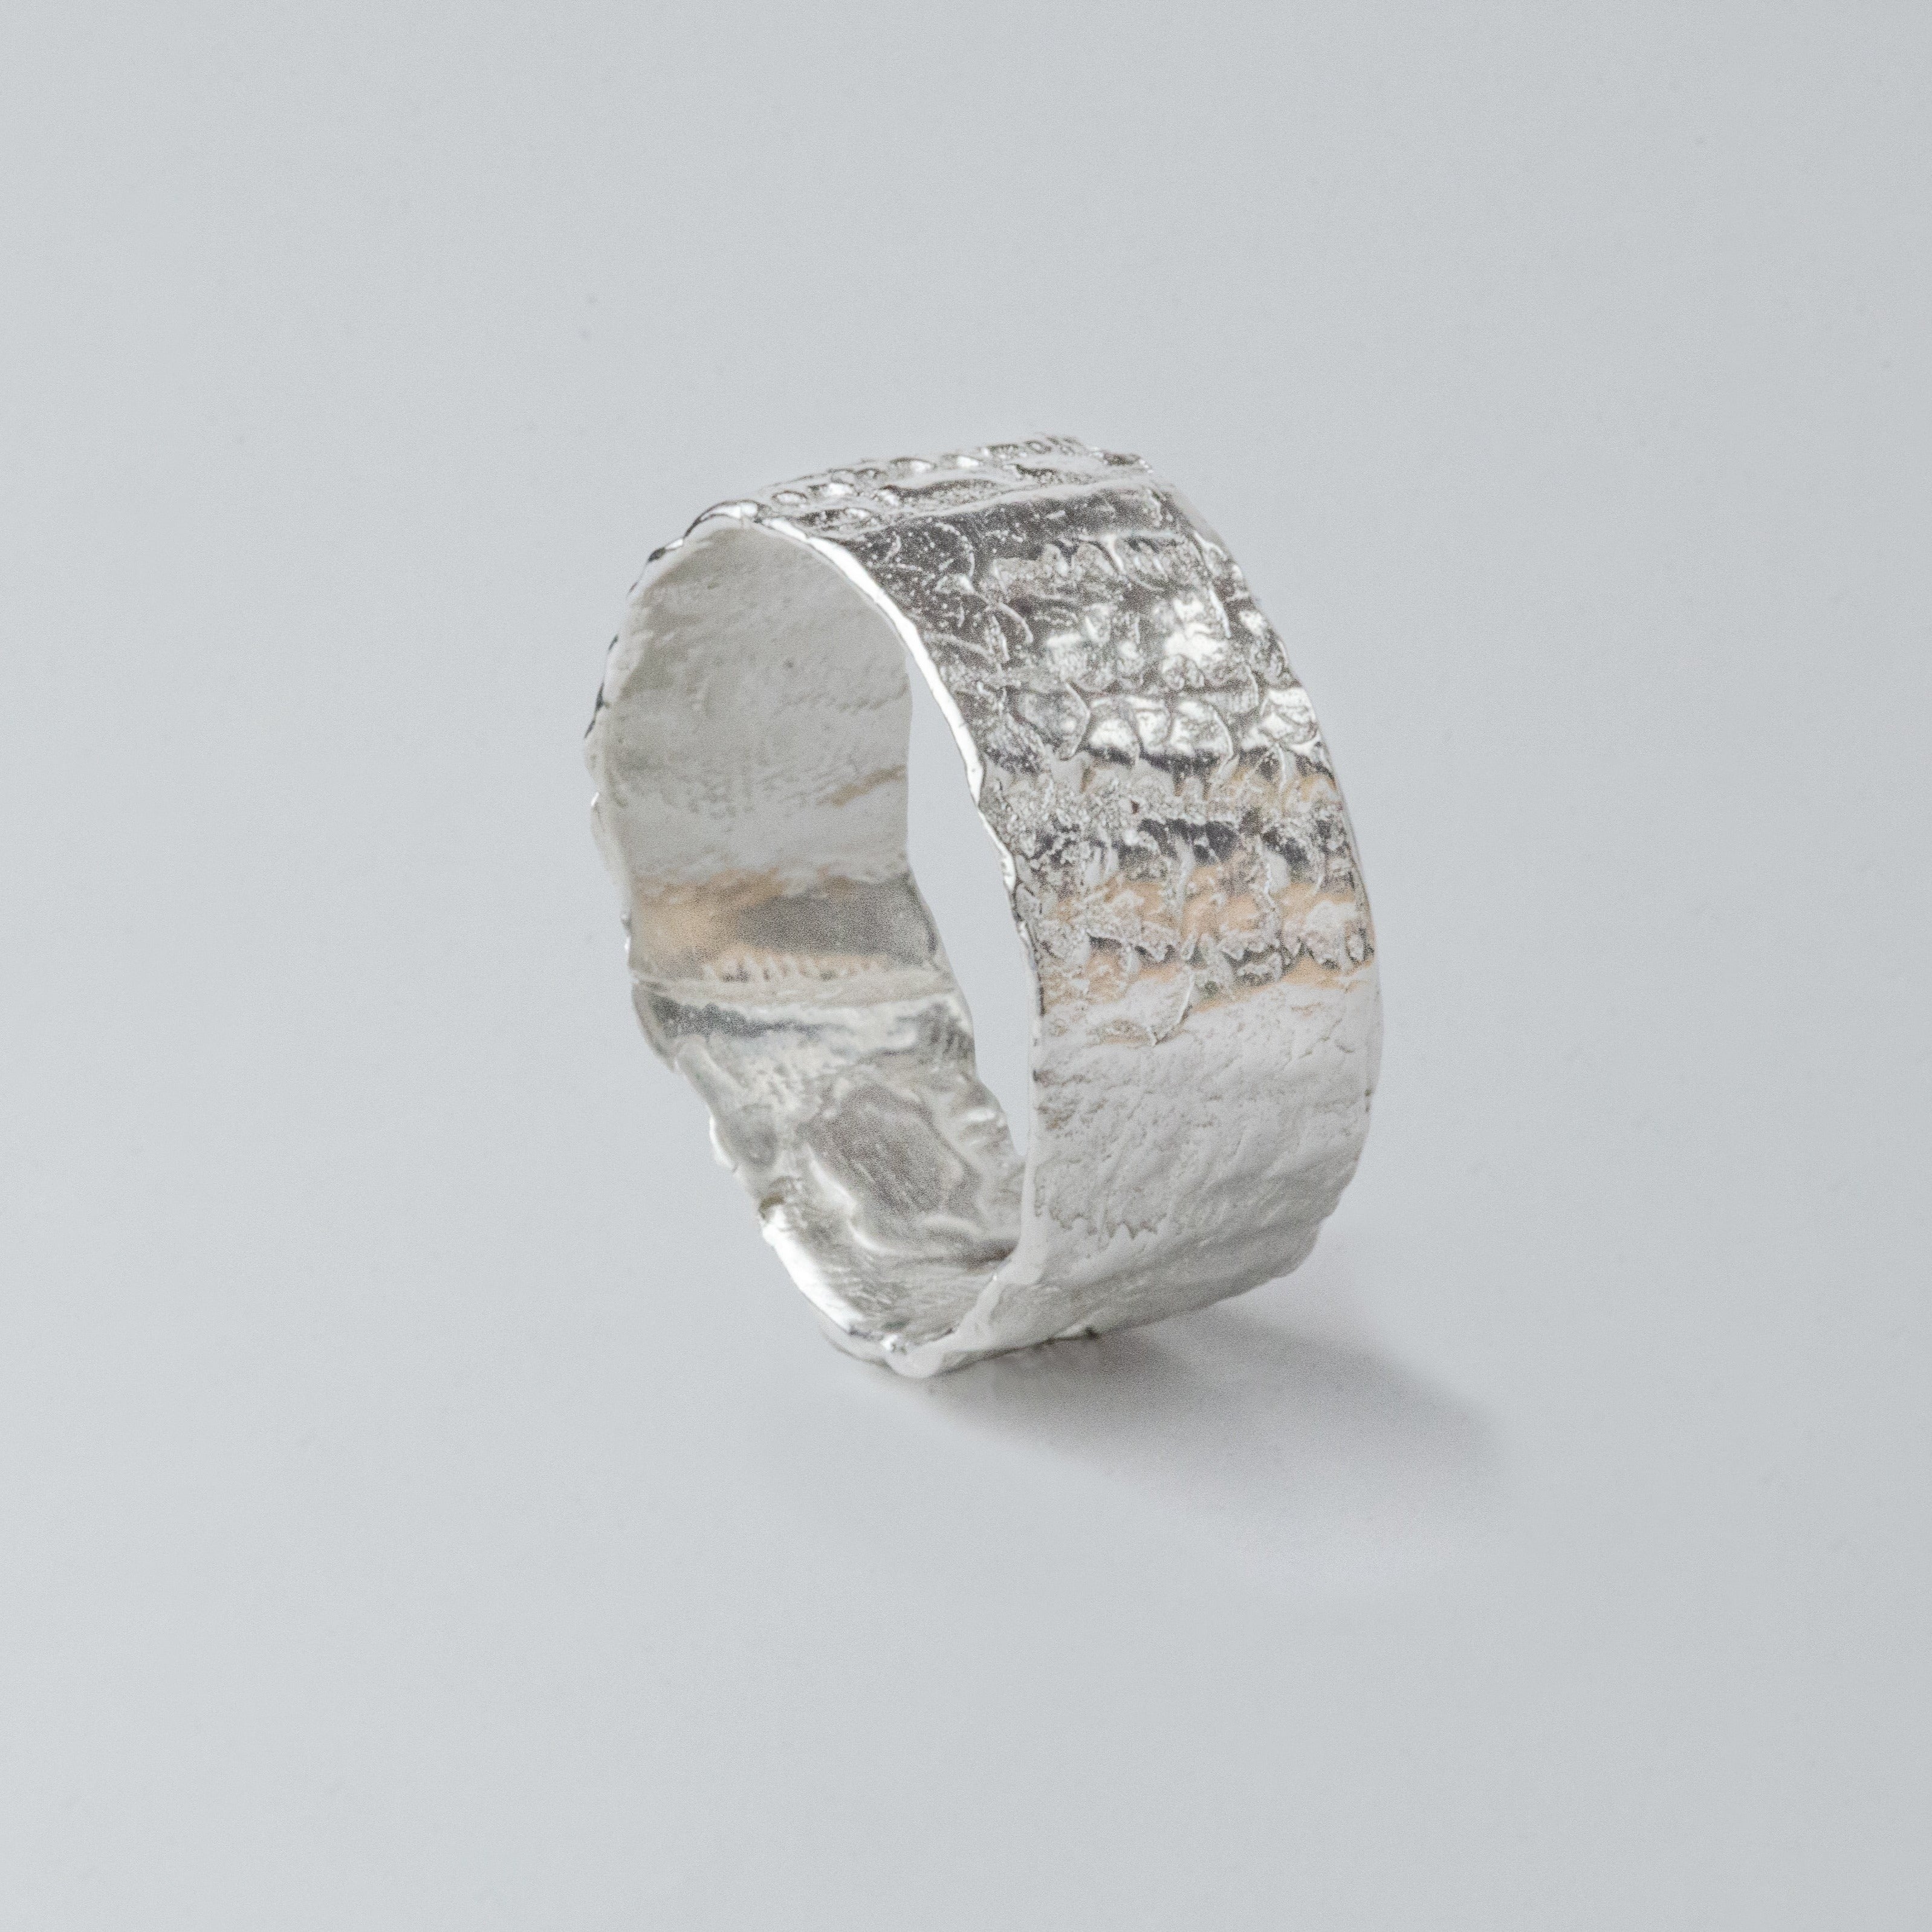 The textured ring features a stunning shell imprint, hidden scale details and elements of the human touch. This special ring is delicate, yet a statement, making it the perfect addition to your collection. Enjoy this piece everyday and let its oceanic texture transport you to the deepest depths of the ocean.